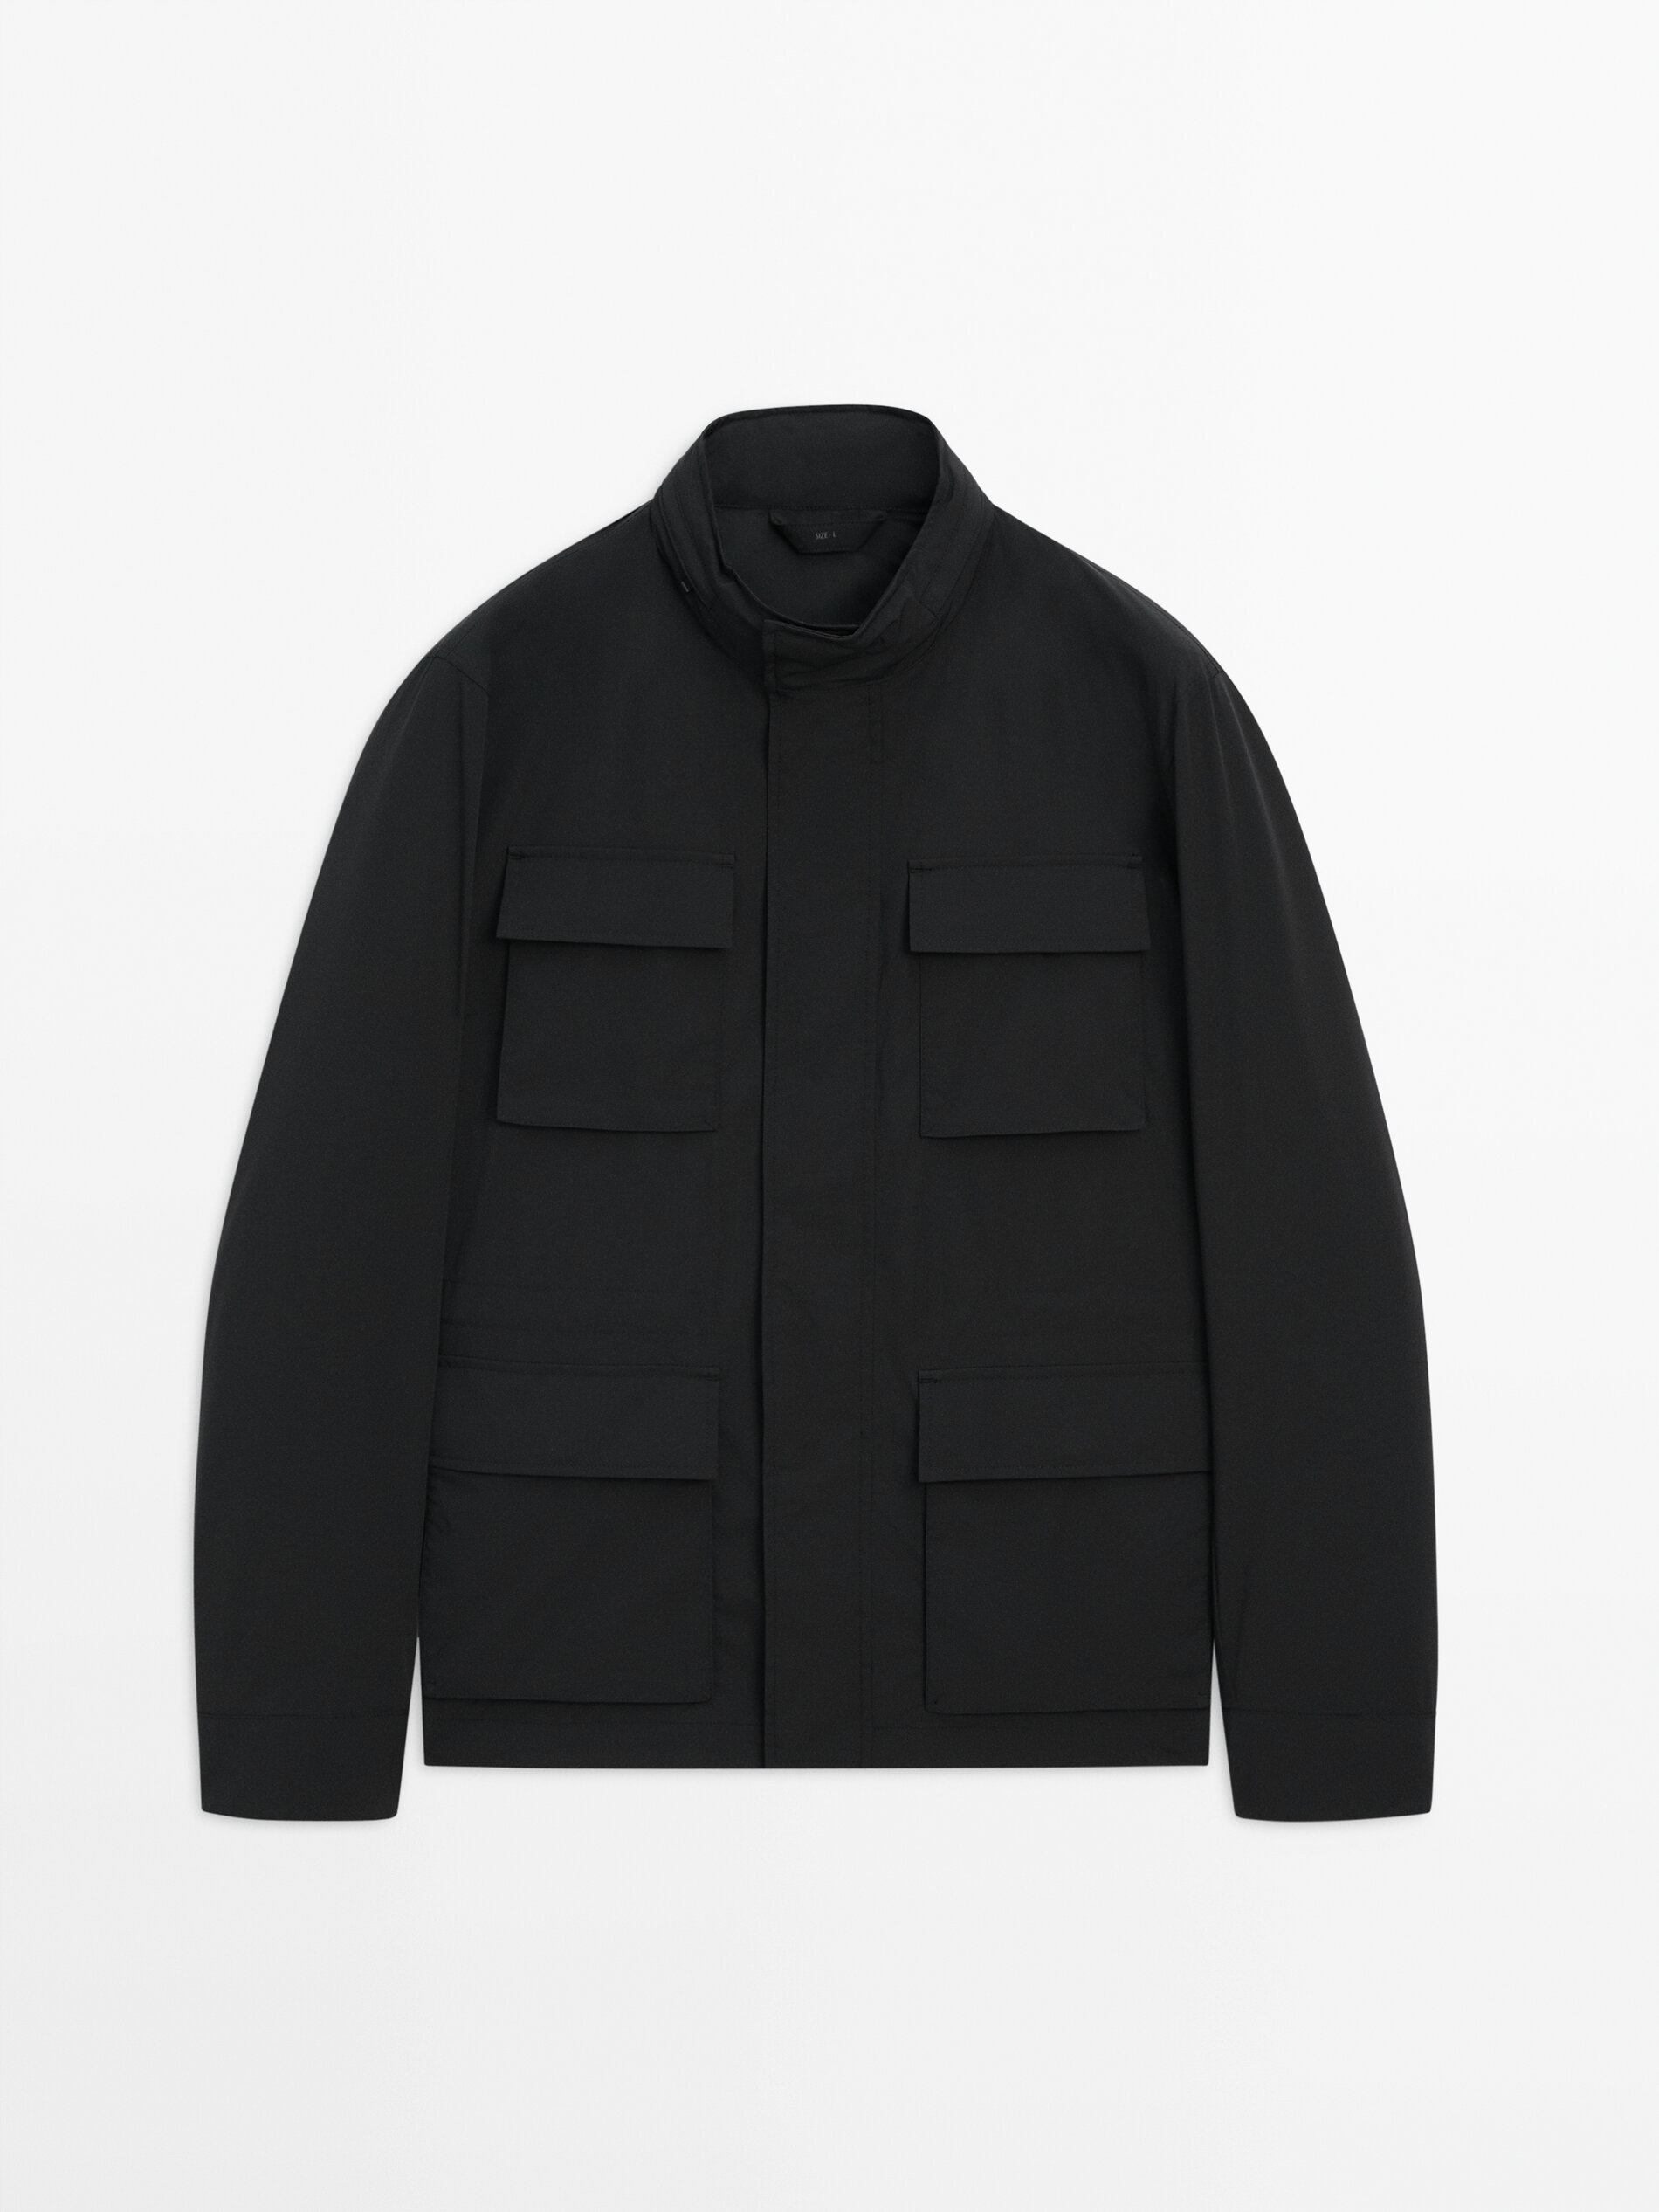 Light technical jacket with pockets